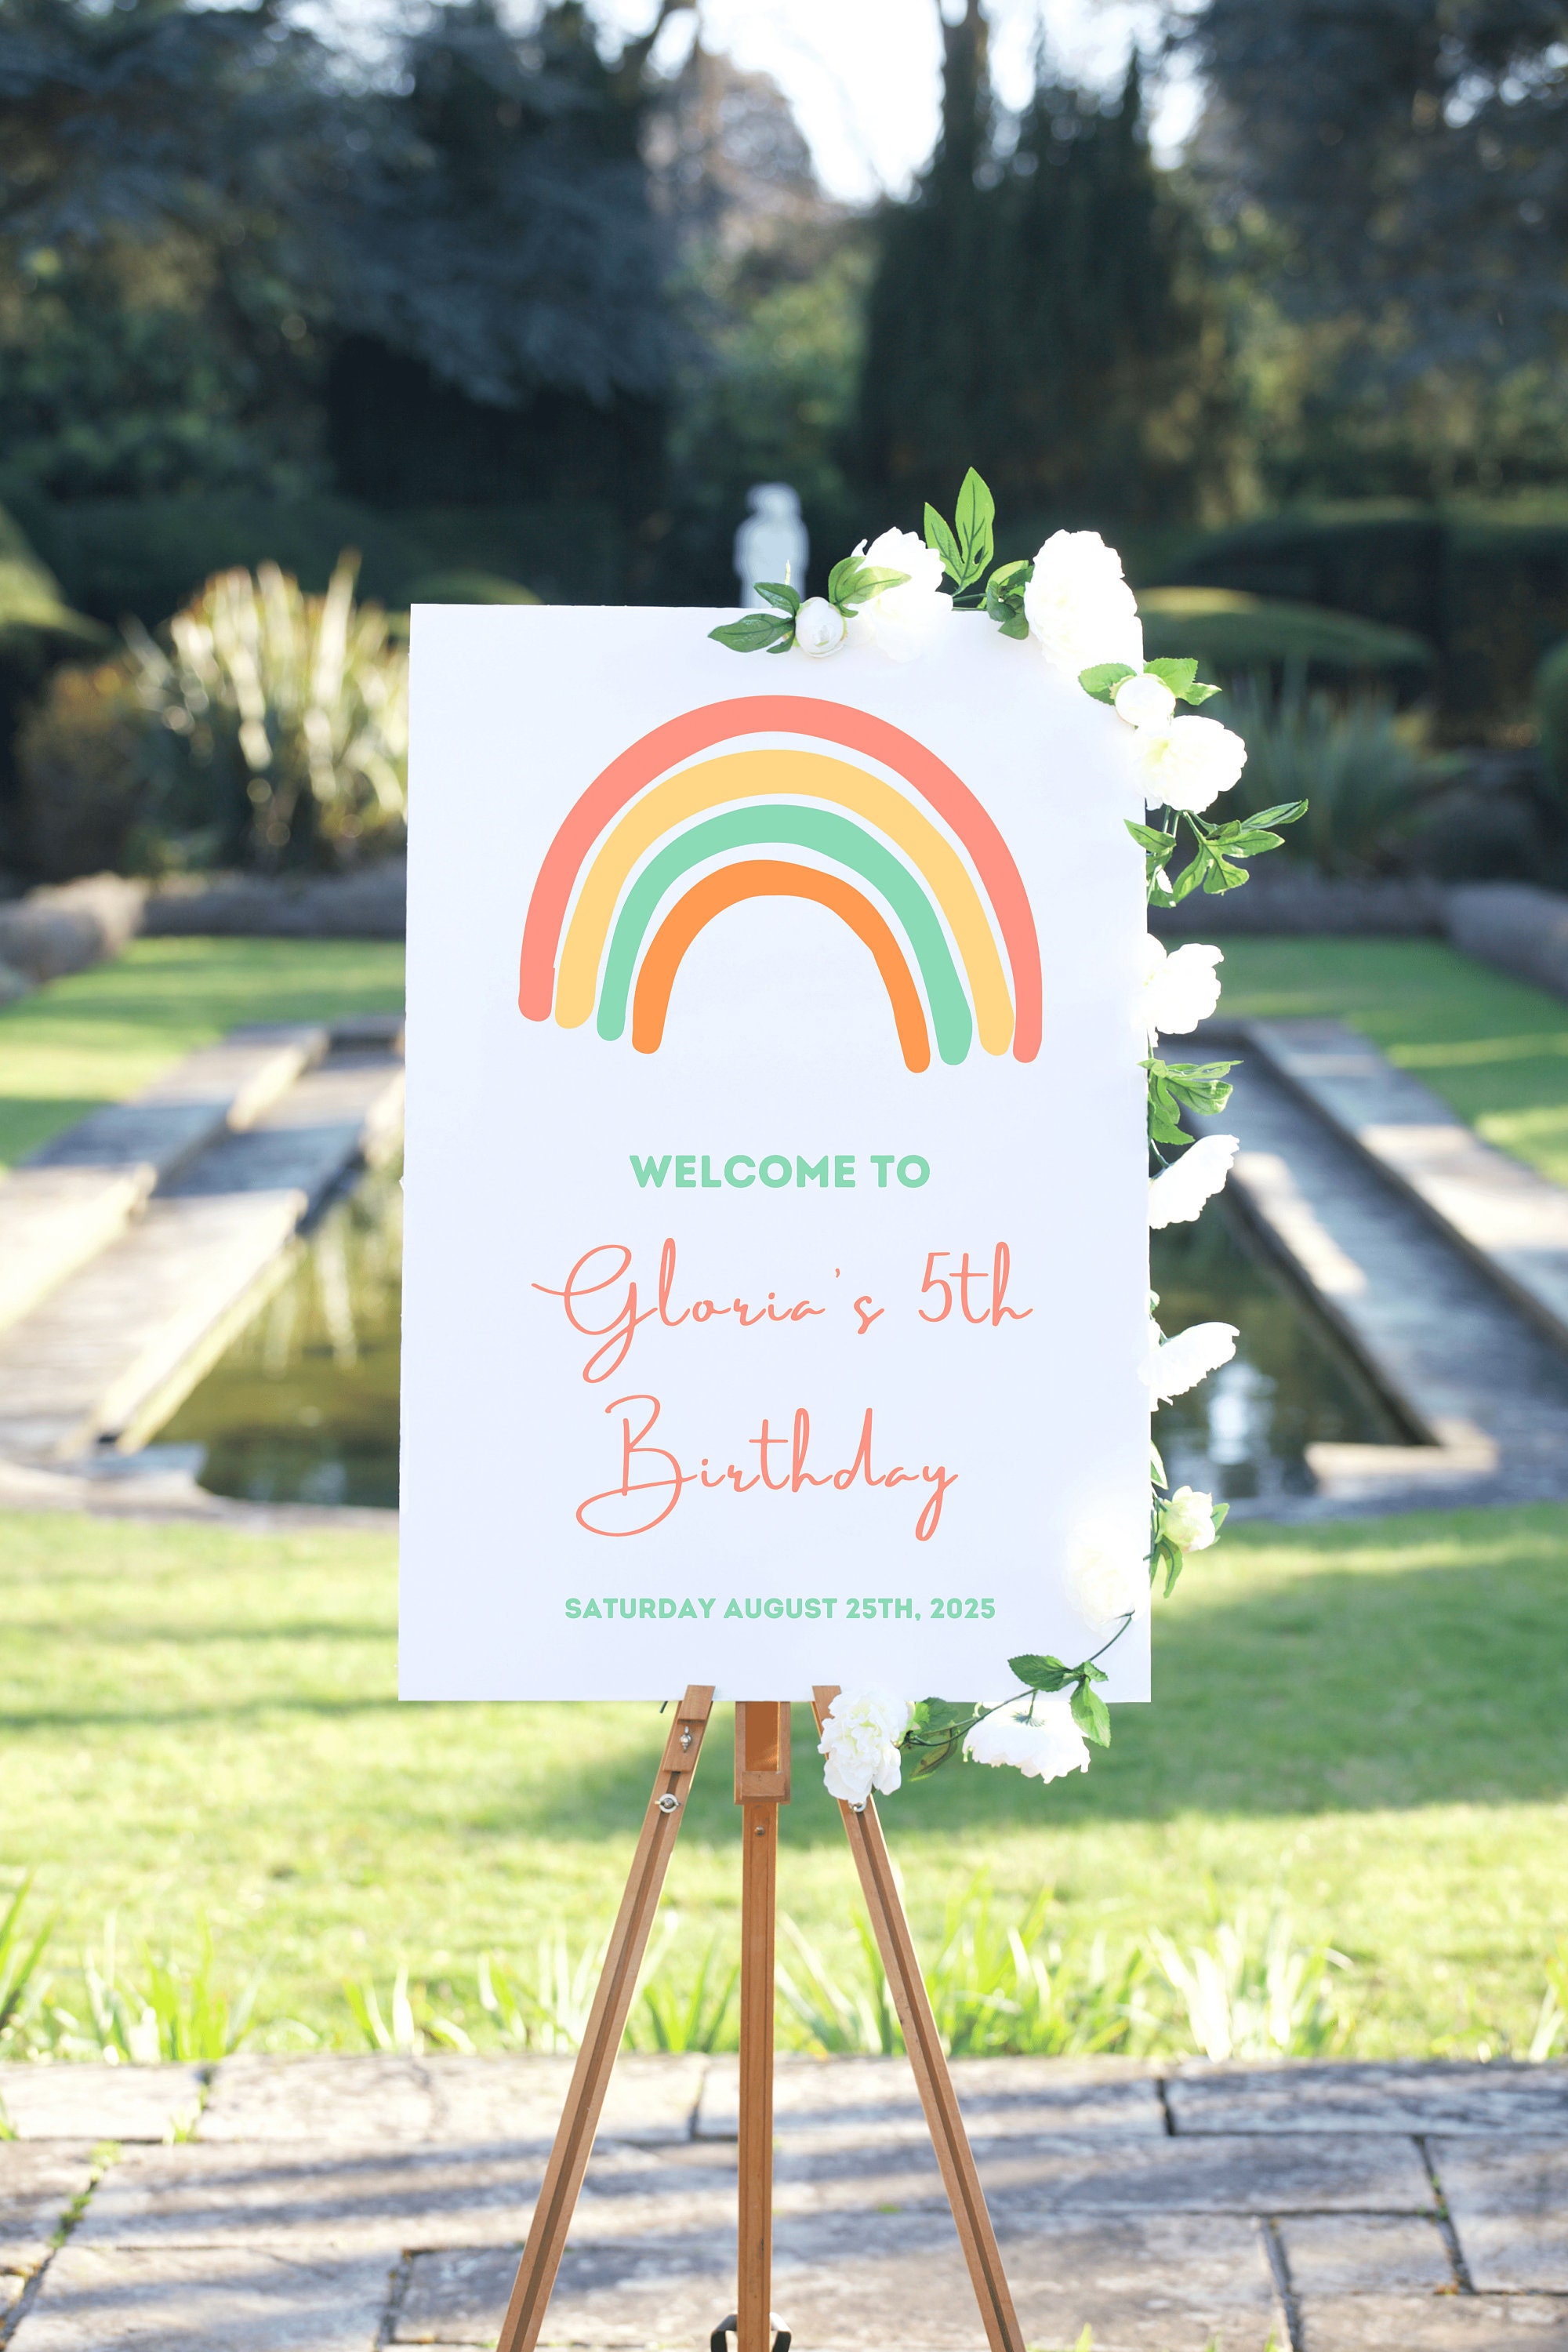 Rainbow Party Welcome Sign  Uniquely Designed & Easily